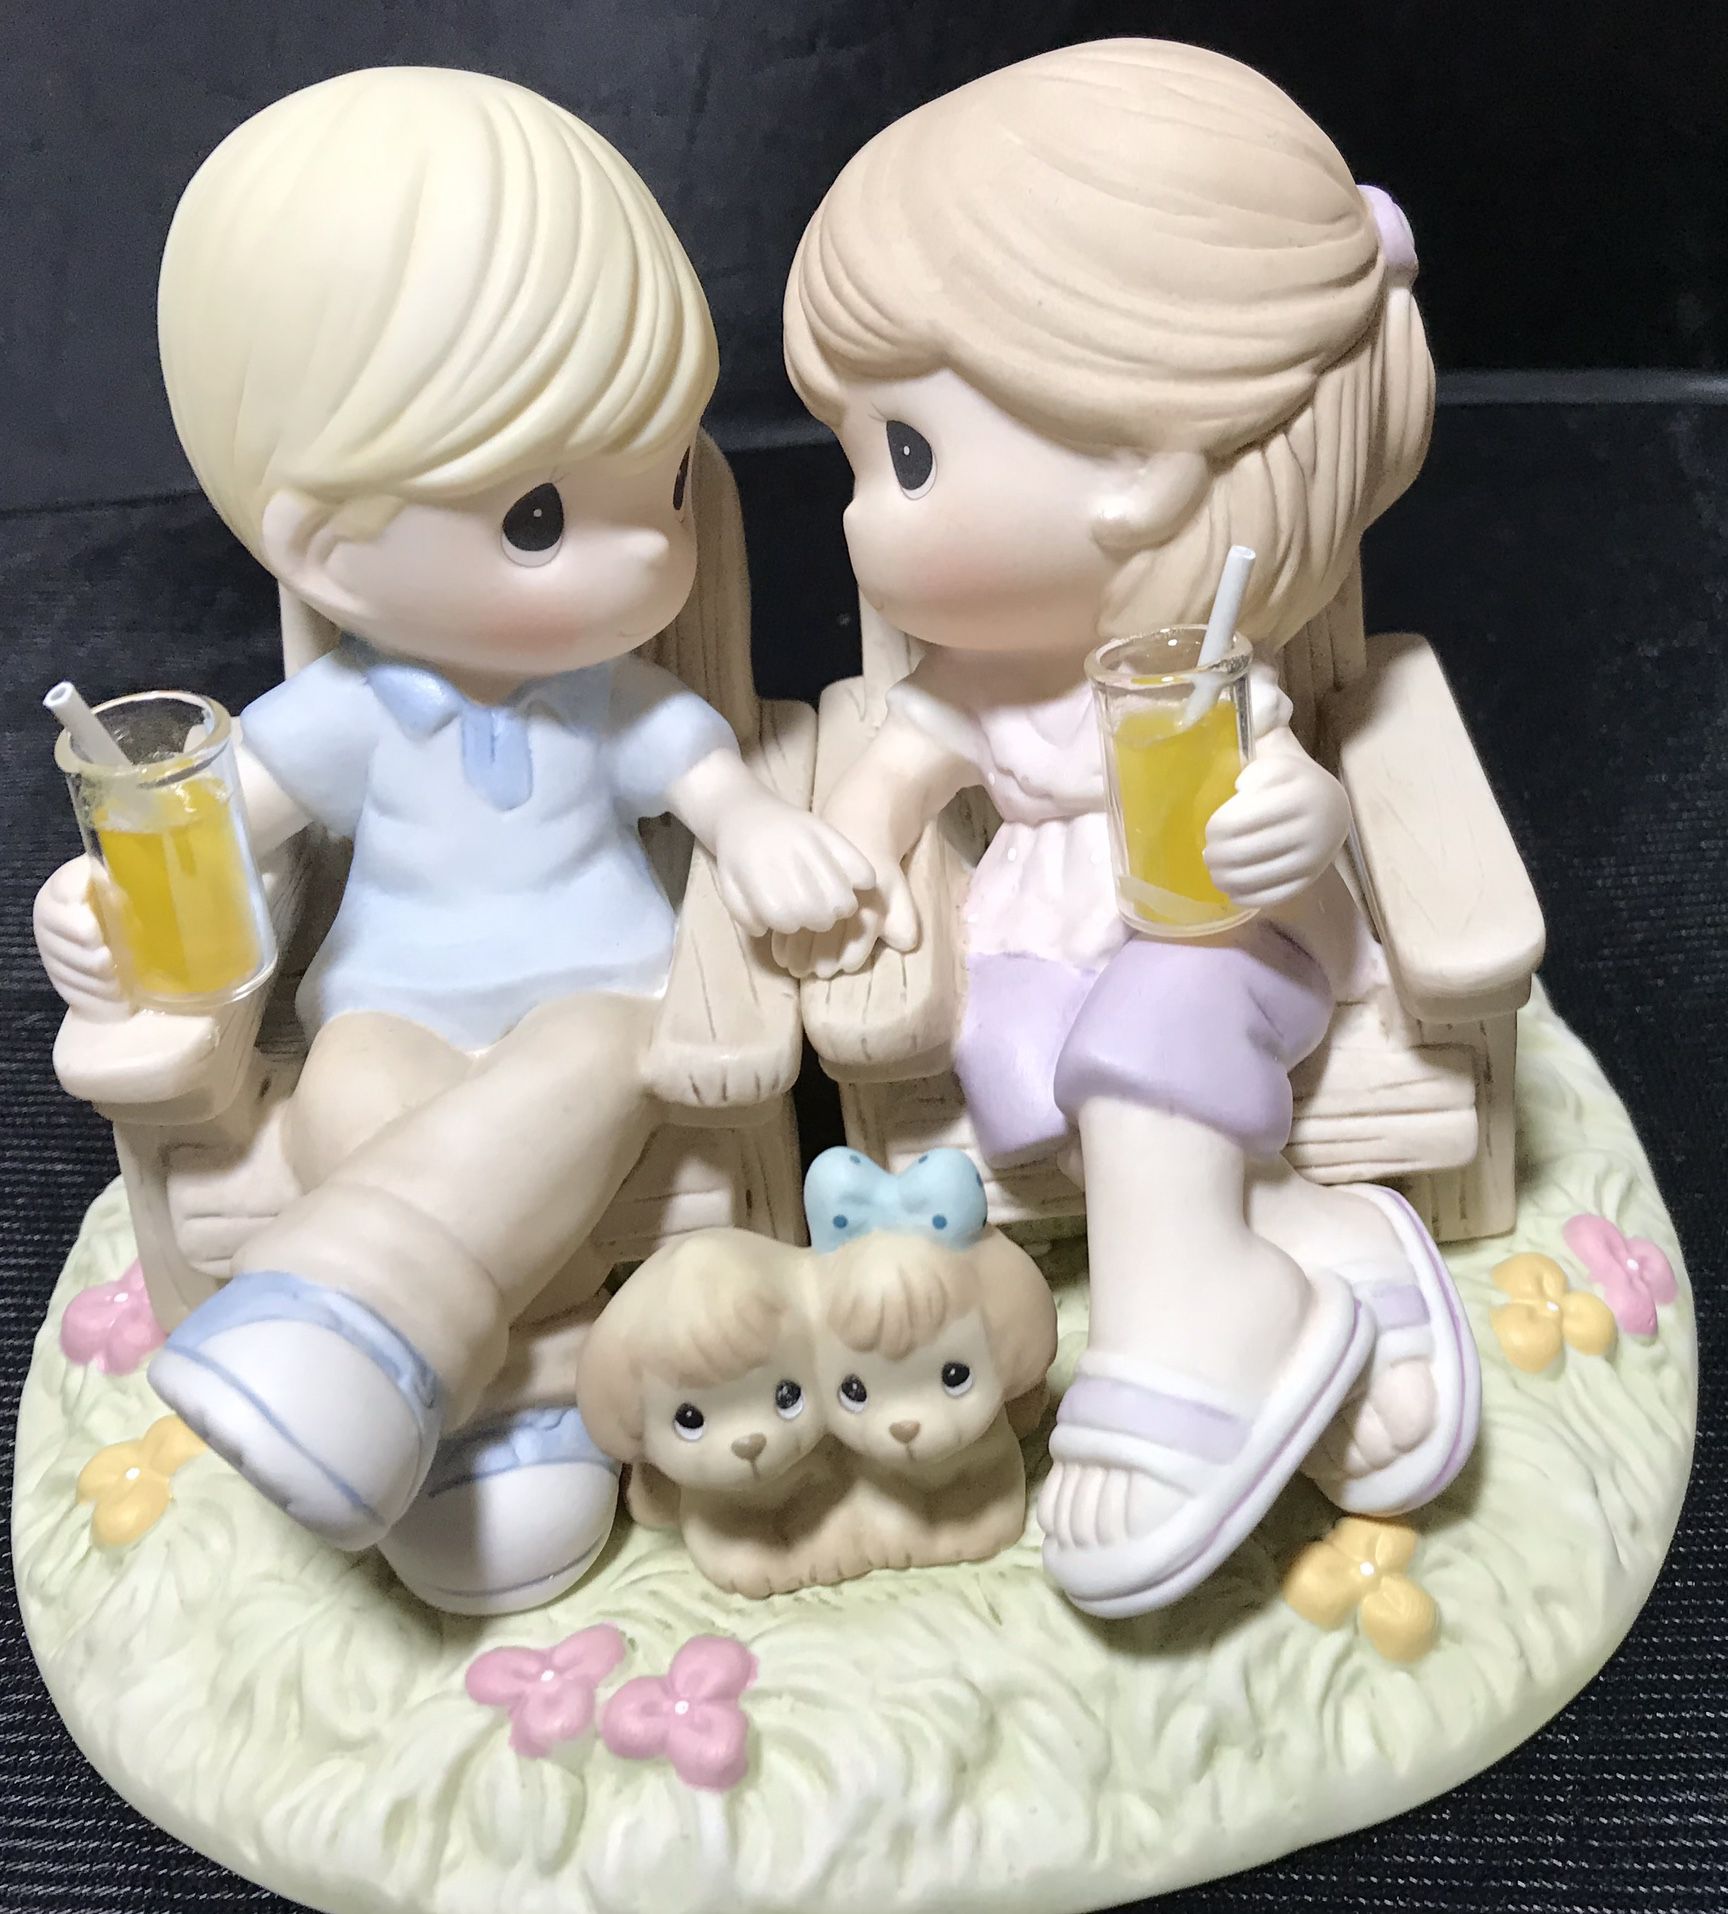 Precious Moments figurine #104018 “Always Be By My Side